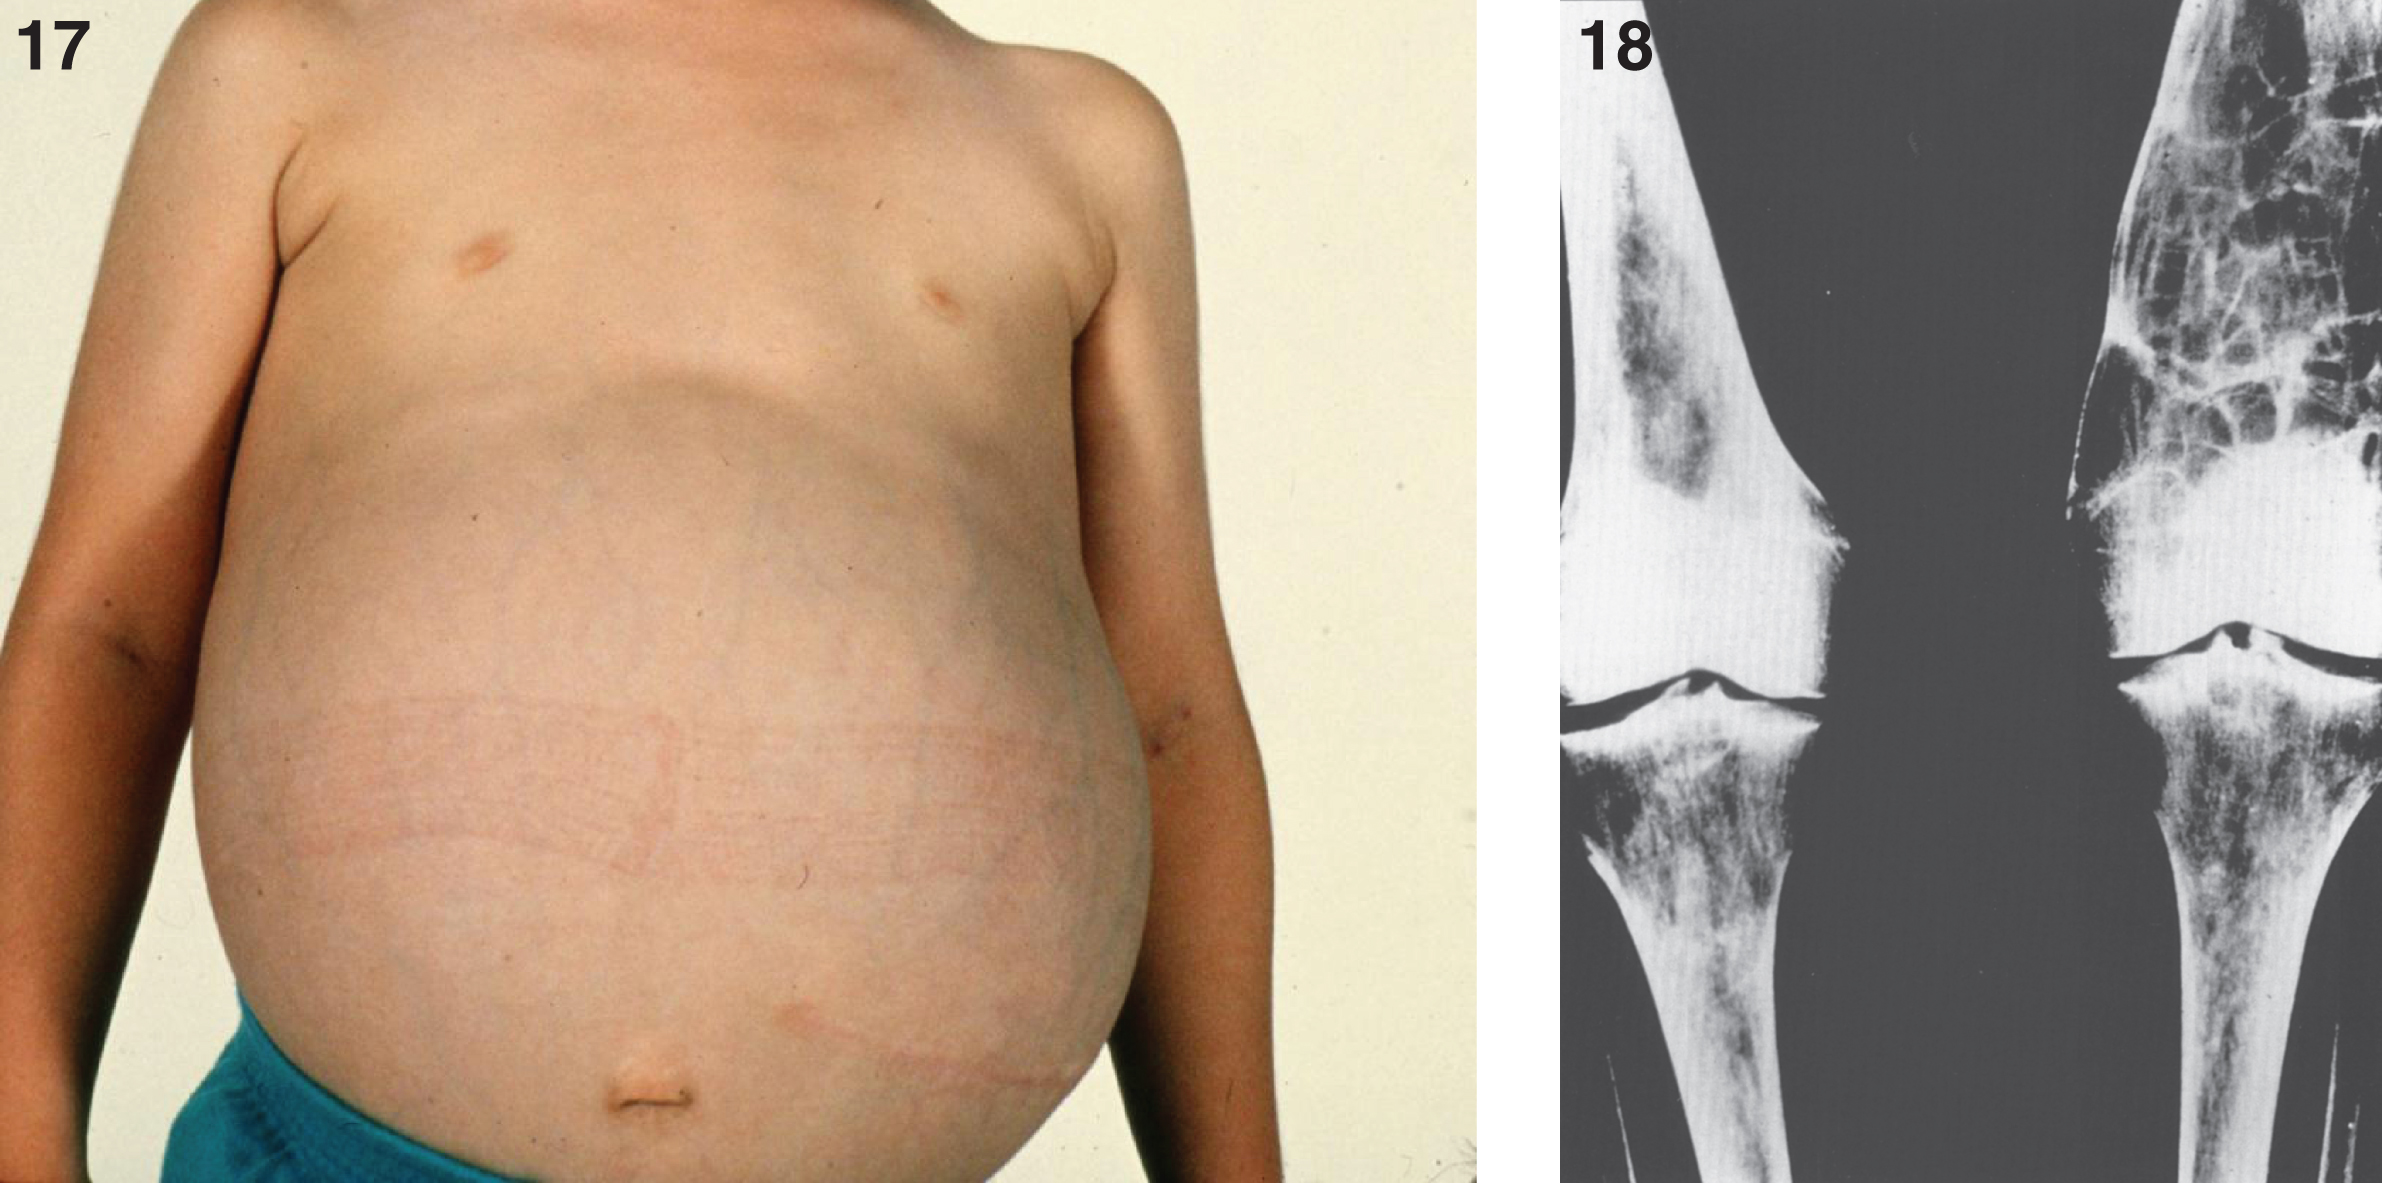 Gaucher disease type I. A child 10 years of age showing marked distension of the abdomen due to massive splenomegaly. The spleen was surgically removed and weighed 10 kg; (18) Gaucher disease. Radiograph of lower extremities showing Erlenmeyer flask deformity of the distal ends of the femur.